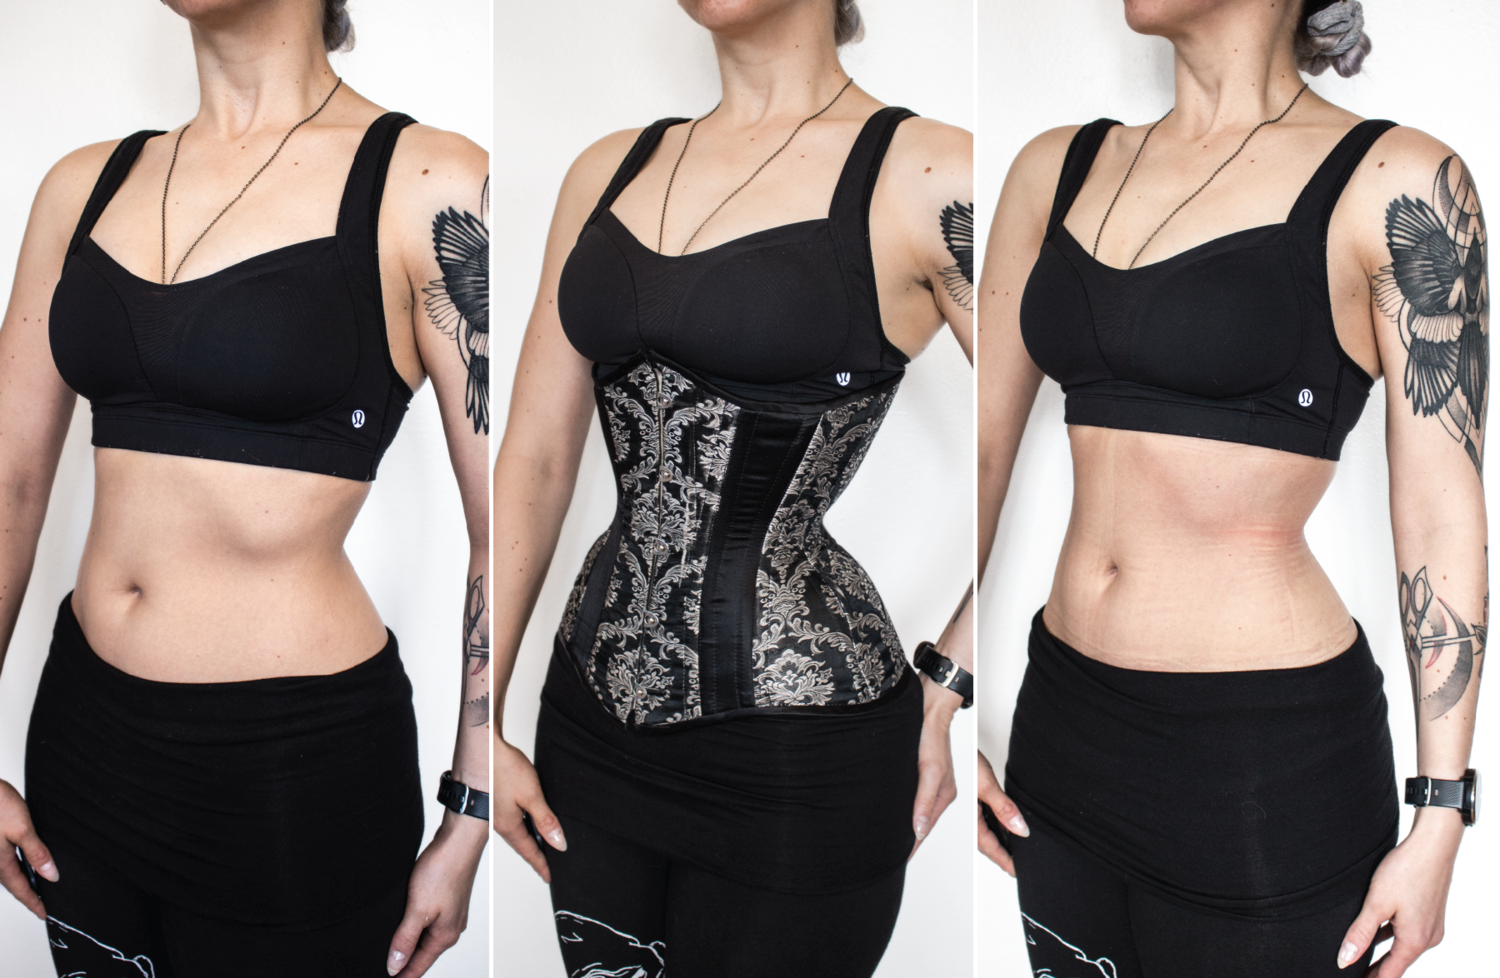 Are the results of corset training permanent ? Lots of questions